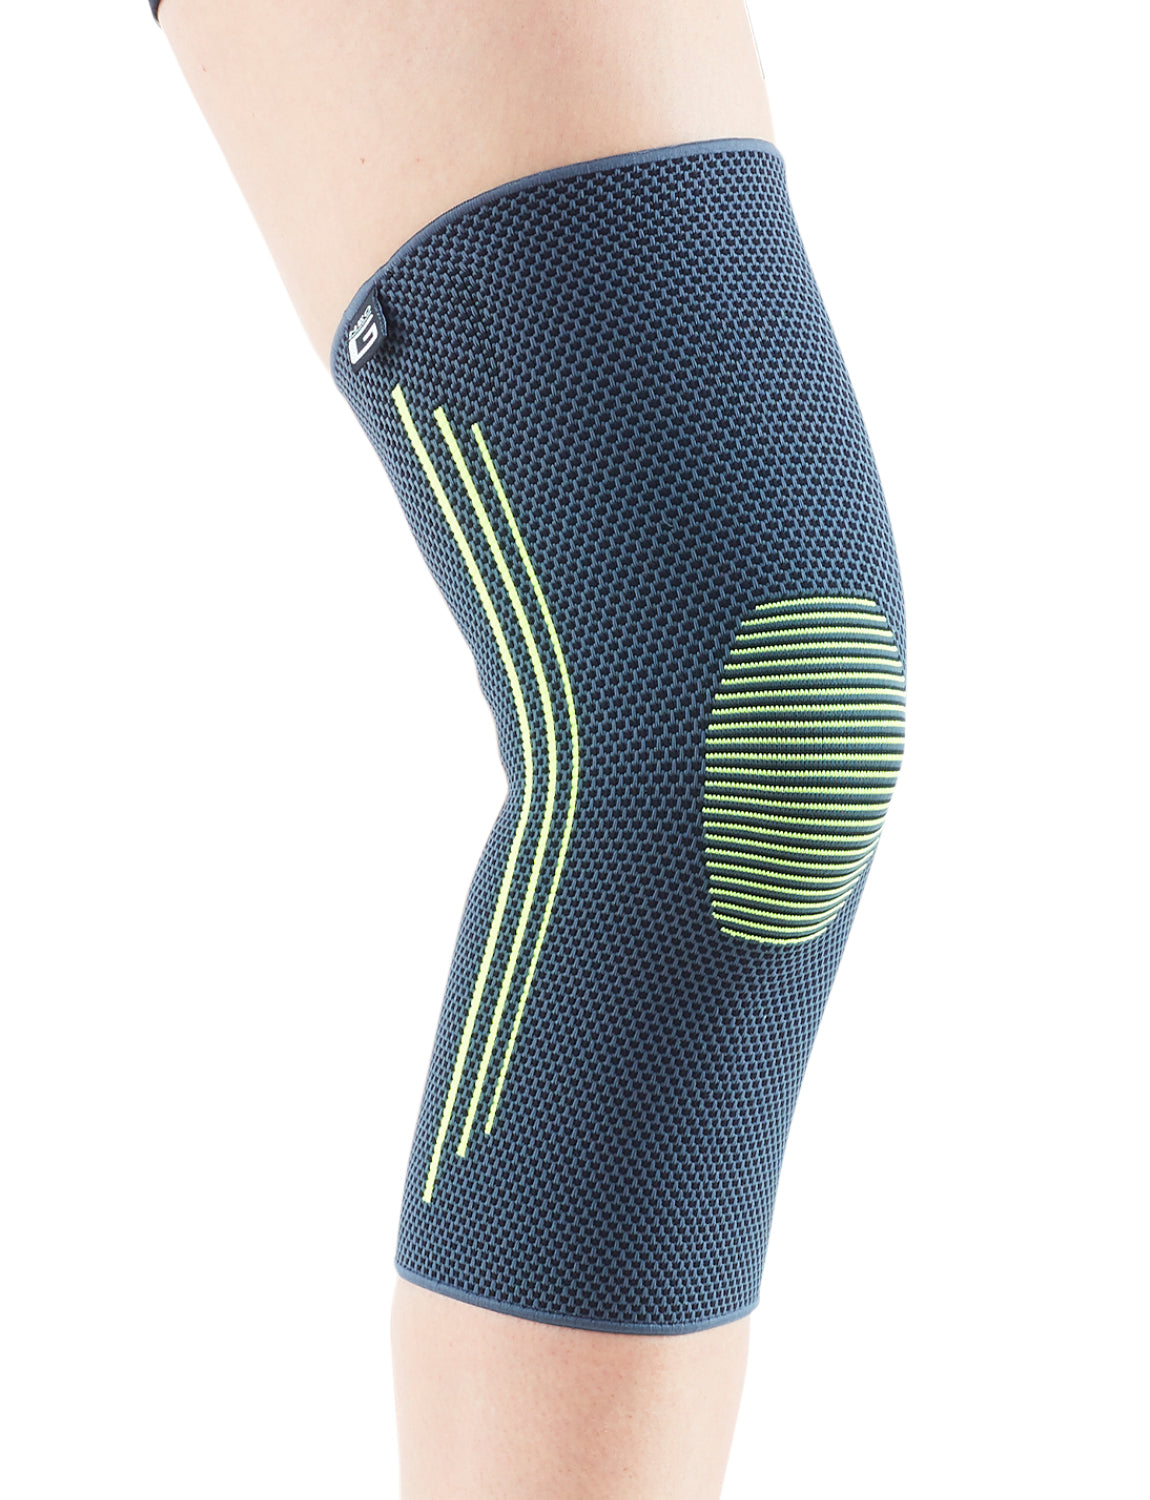  Neo-G Knee Support, Open Patella – Knee Support for Knee Pain  Arthritis, Joint Pain Relief, Meniscus tear, runners knee, patella injuries  – Knee support for women and men - Adjustable Compression 